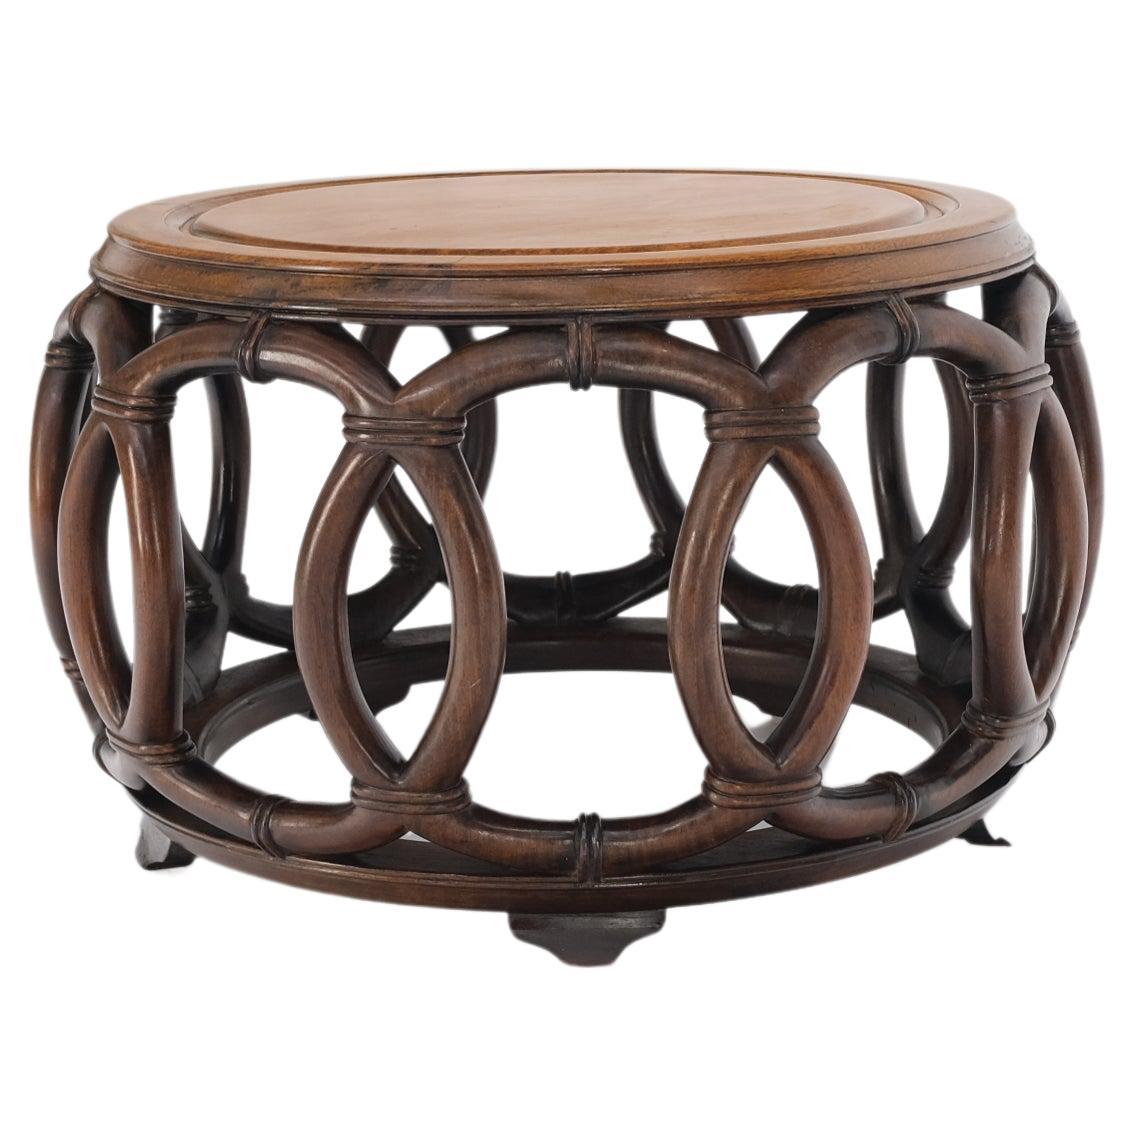 Very Fine Carved Solid Mahogany Round Occasional Coffee Side Center Table For Sale